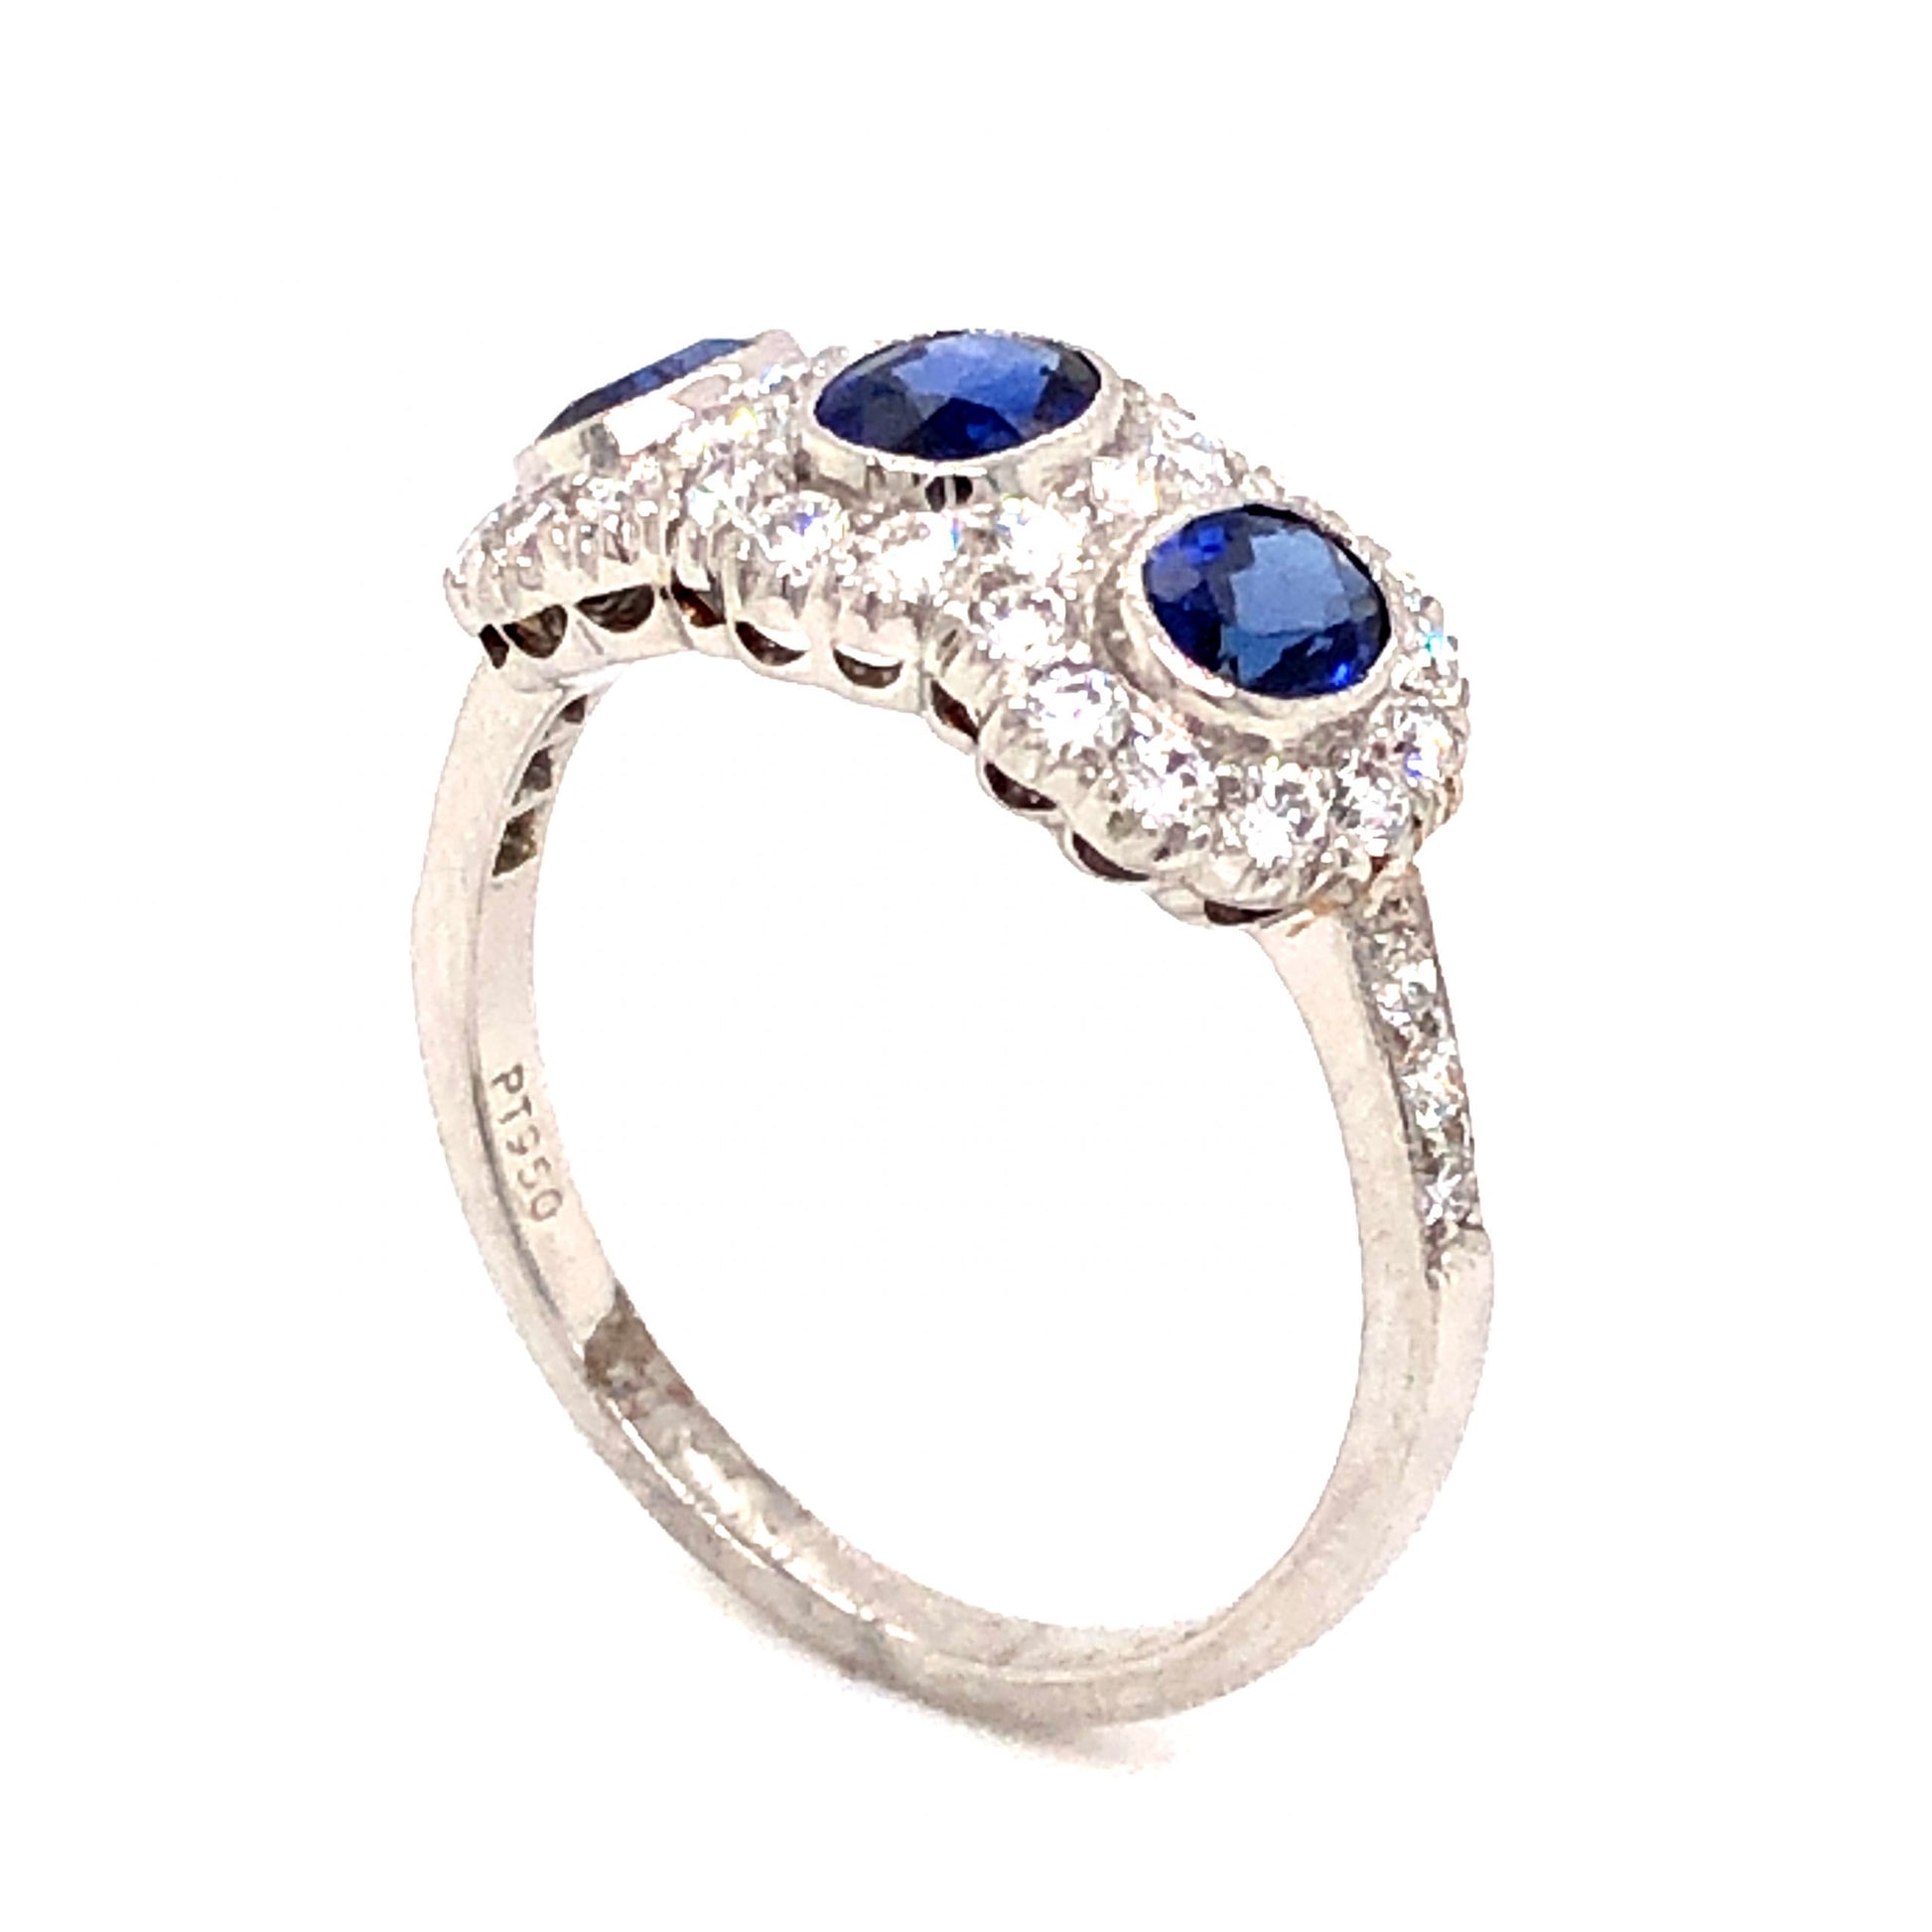 1.46 Oval Cut Sapphire & Diamond Ring in PlatinumComposition: Platinum Ring Size: 6.5 Total Diamond Weight: .57ct Total Gram Weight: 3.9 g Inscription: Pt950
      